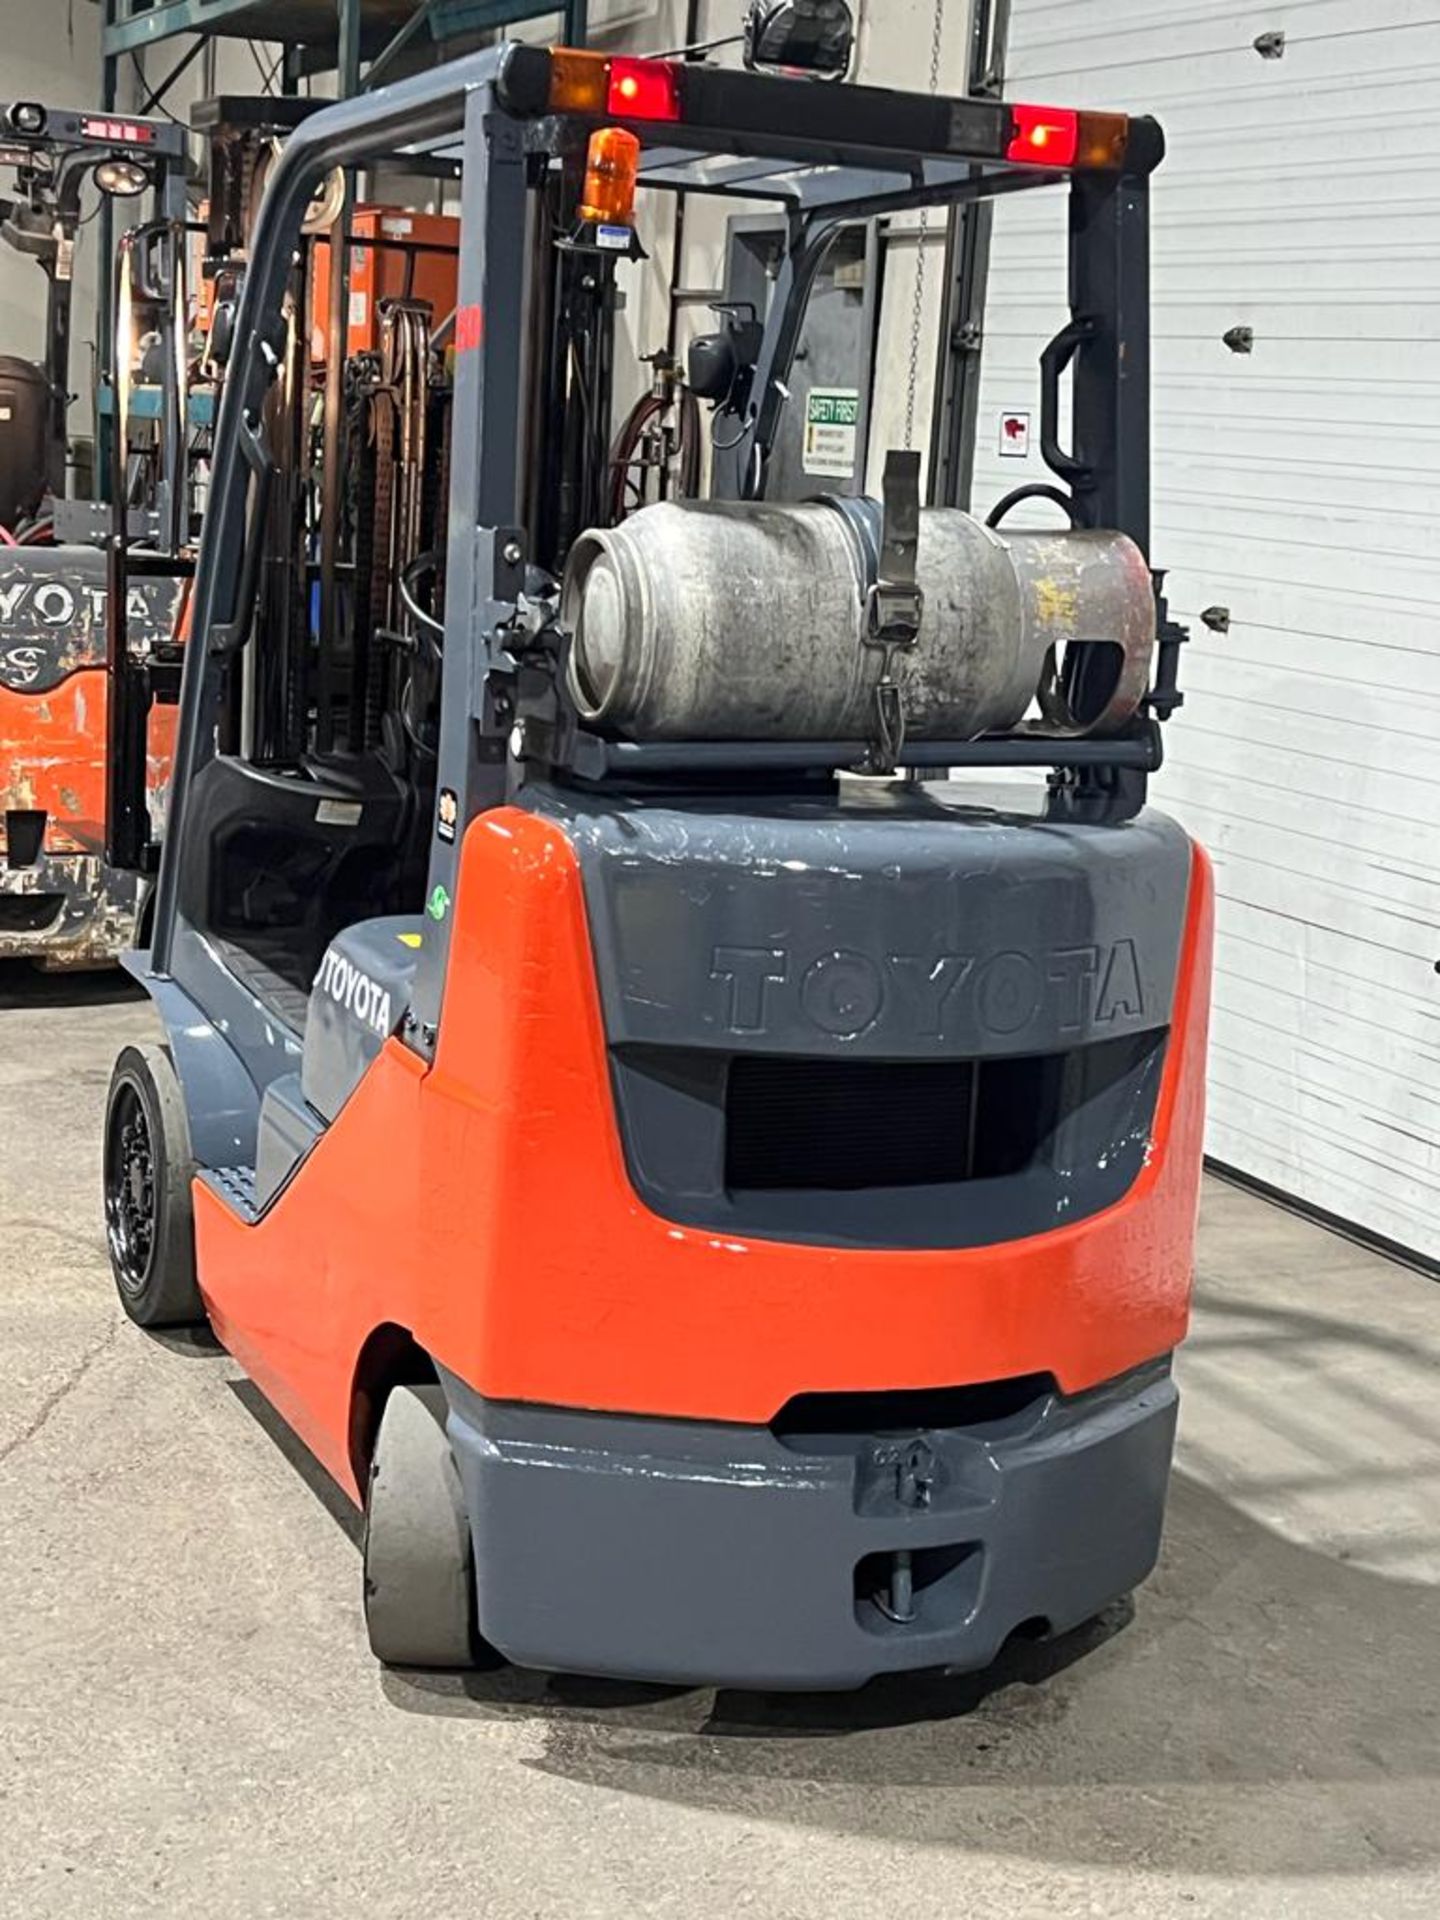 2014 Toyota 5,000lbs Capacity Forklift LPG (propane) with sideshift and 3-STAGE MAST (no propane - Image 2 of 4